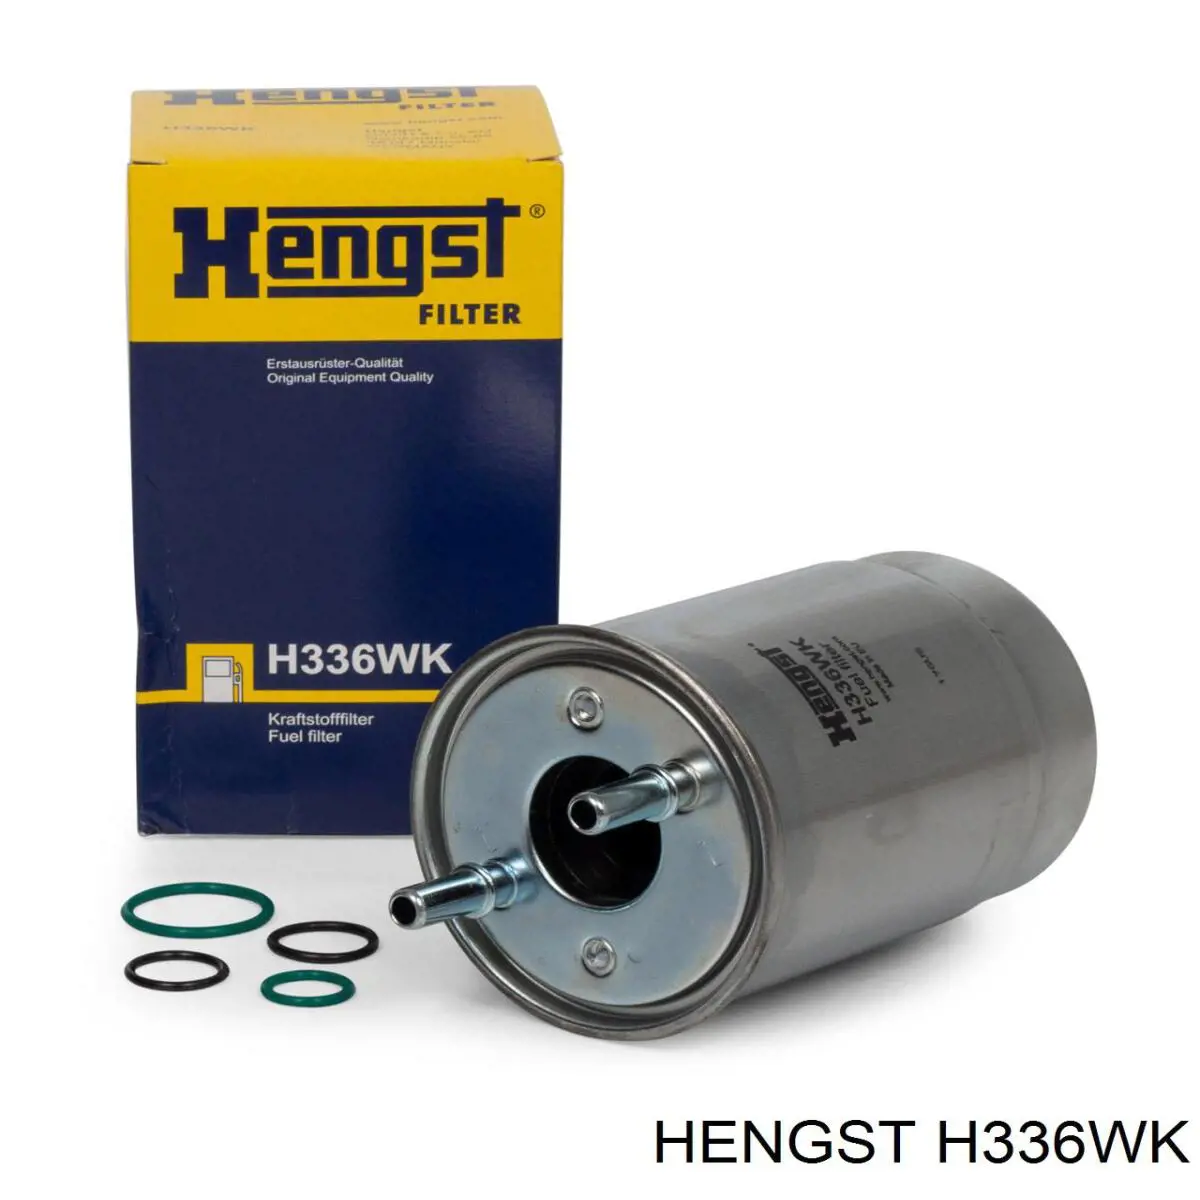 Filtro combustible H336WK Hengst